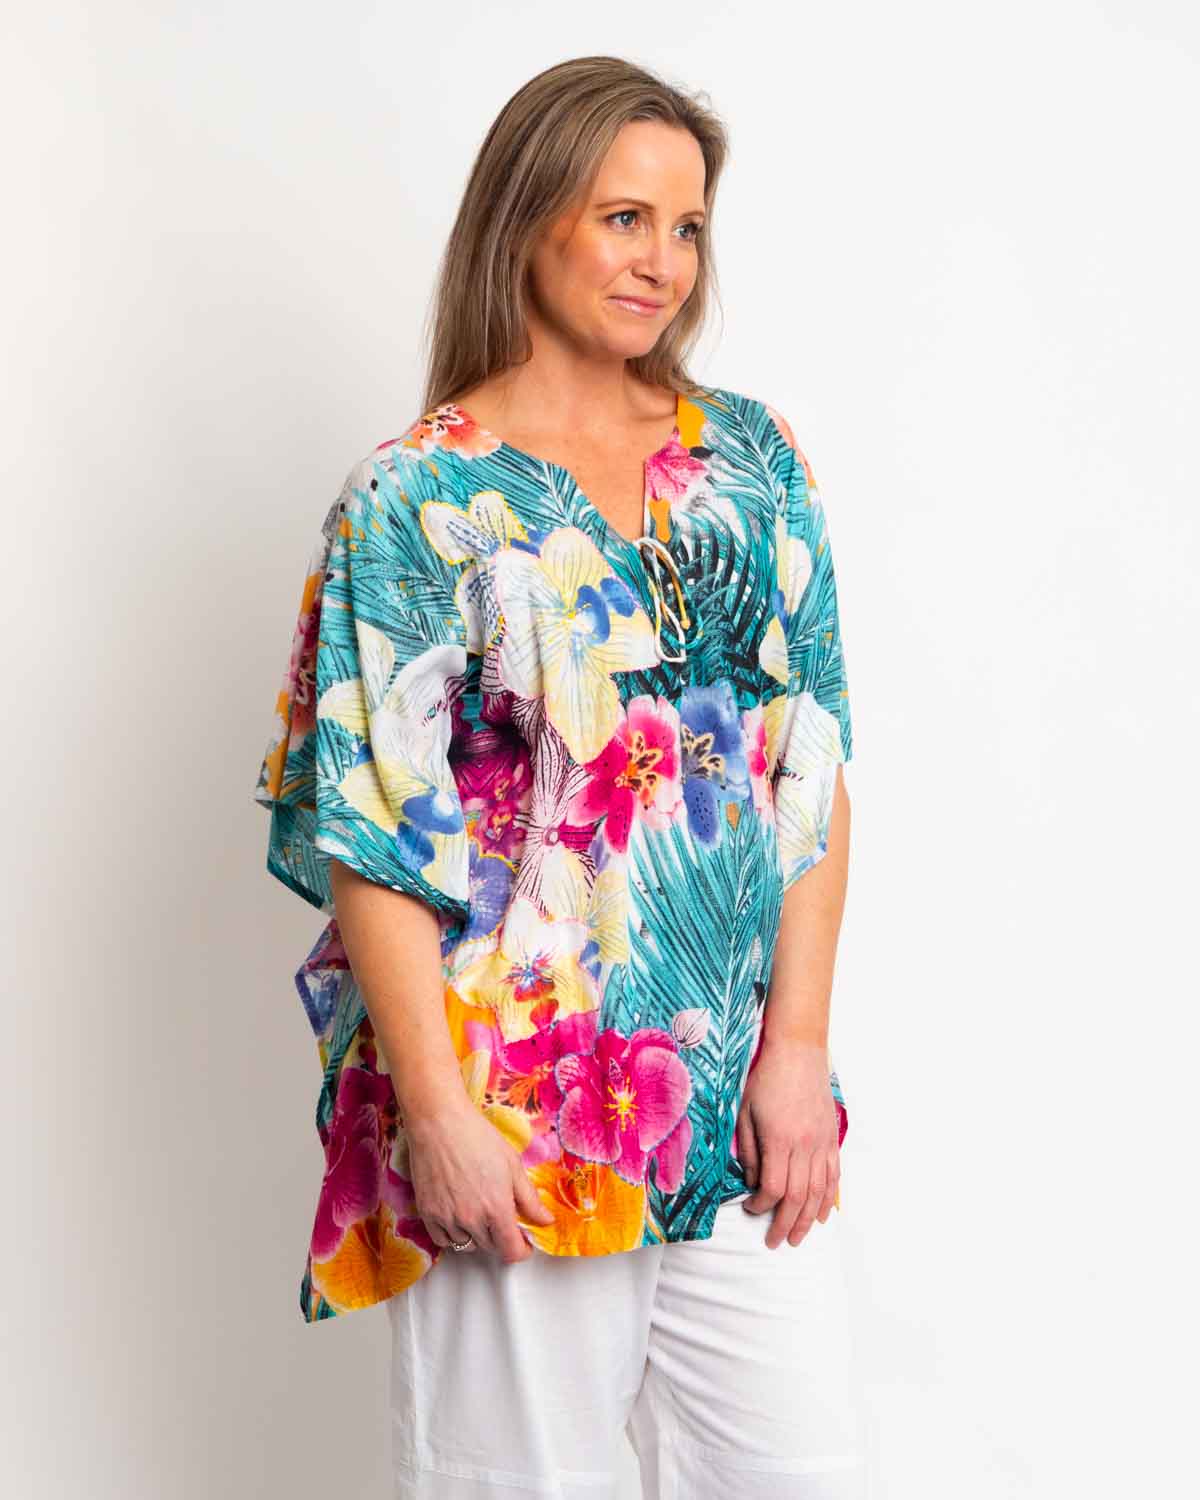 Too Easy Poncho Style V-neck Top in Multi Colour Floral on Peach